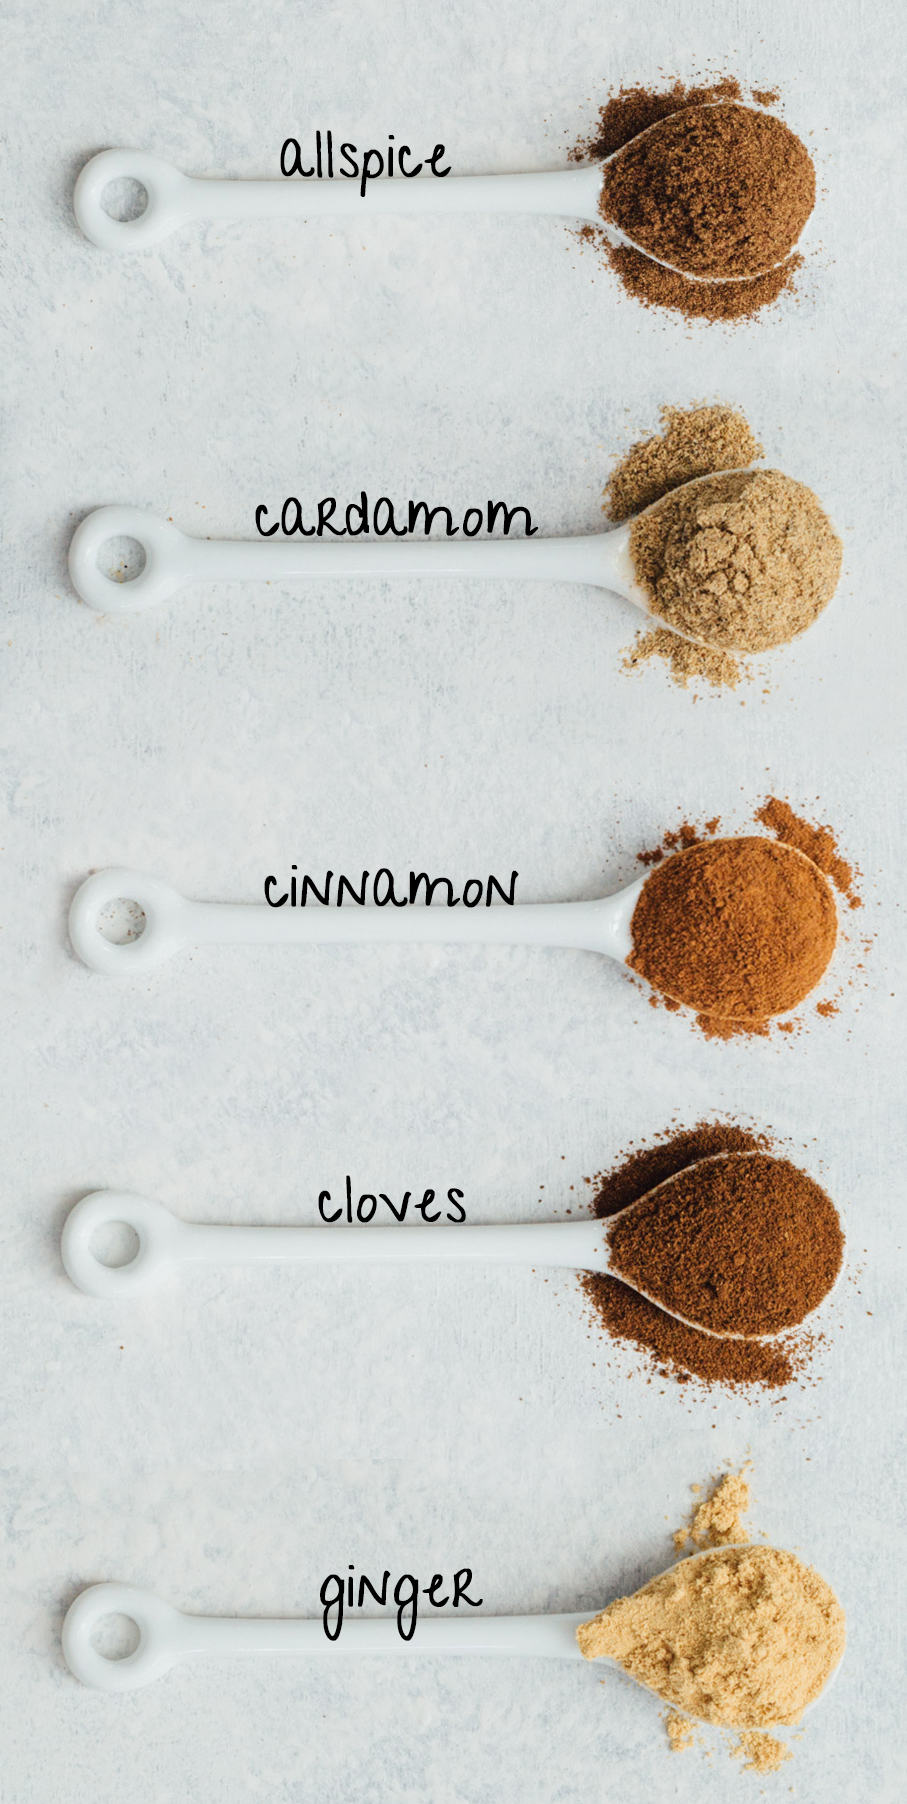 This DIY chai spice blend is one that you'll want to make for the season! Countless recipes and drinks can use this chai spice mix blend to warm you right up!